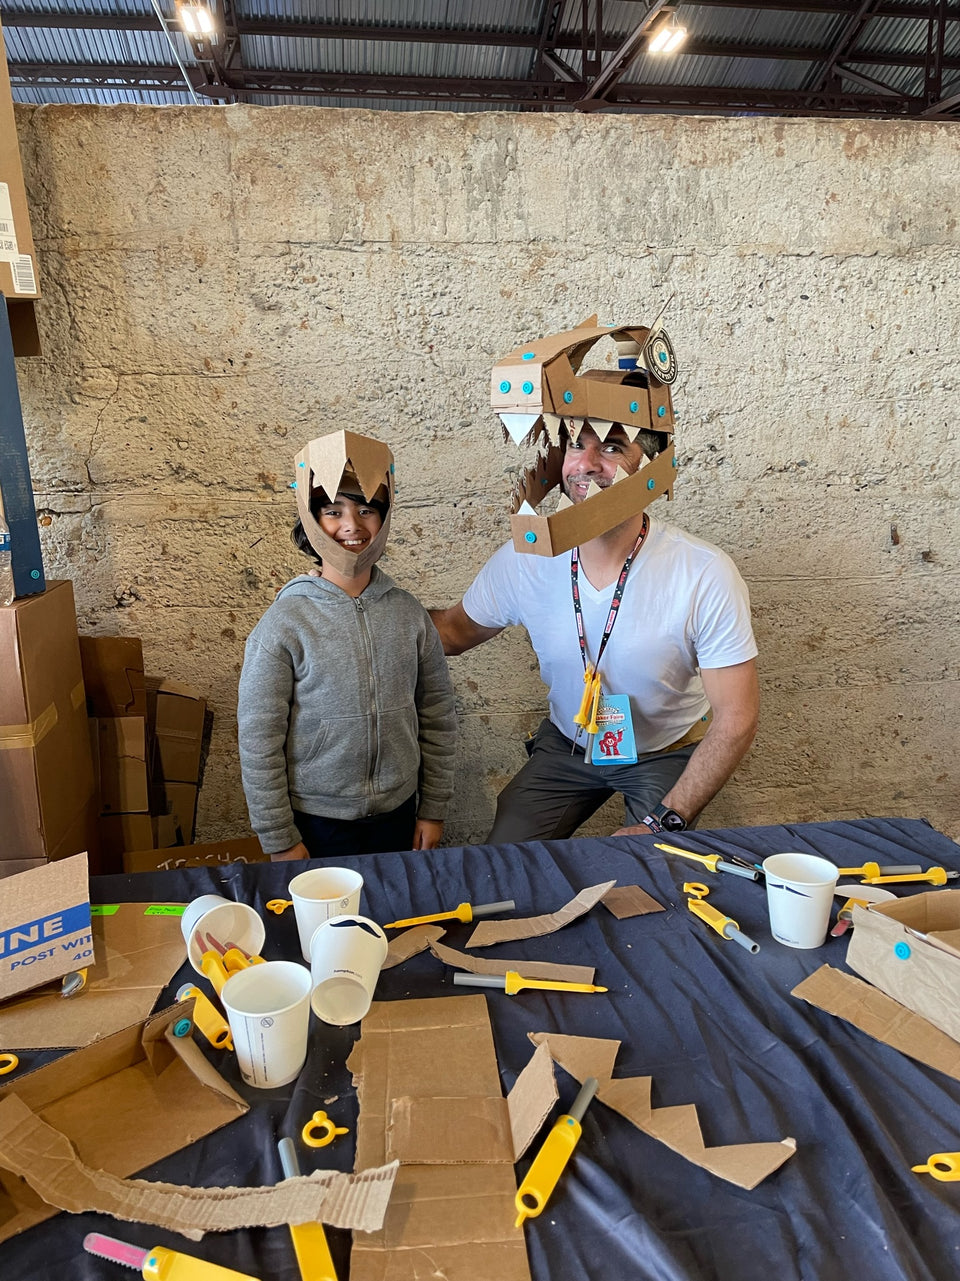 Makedo is a simple to use, open-ended system of tools for creative  cardboard construction.